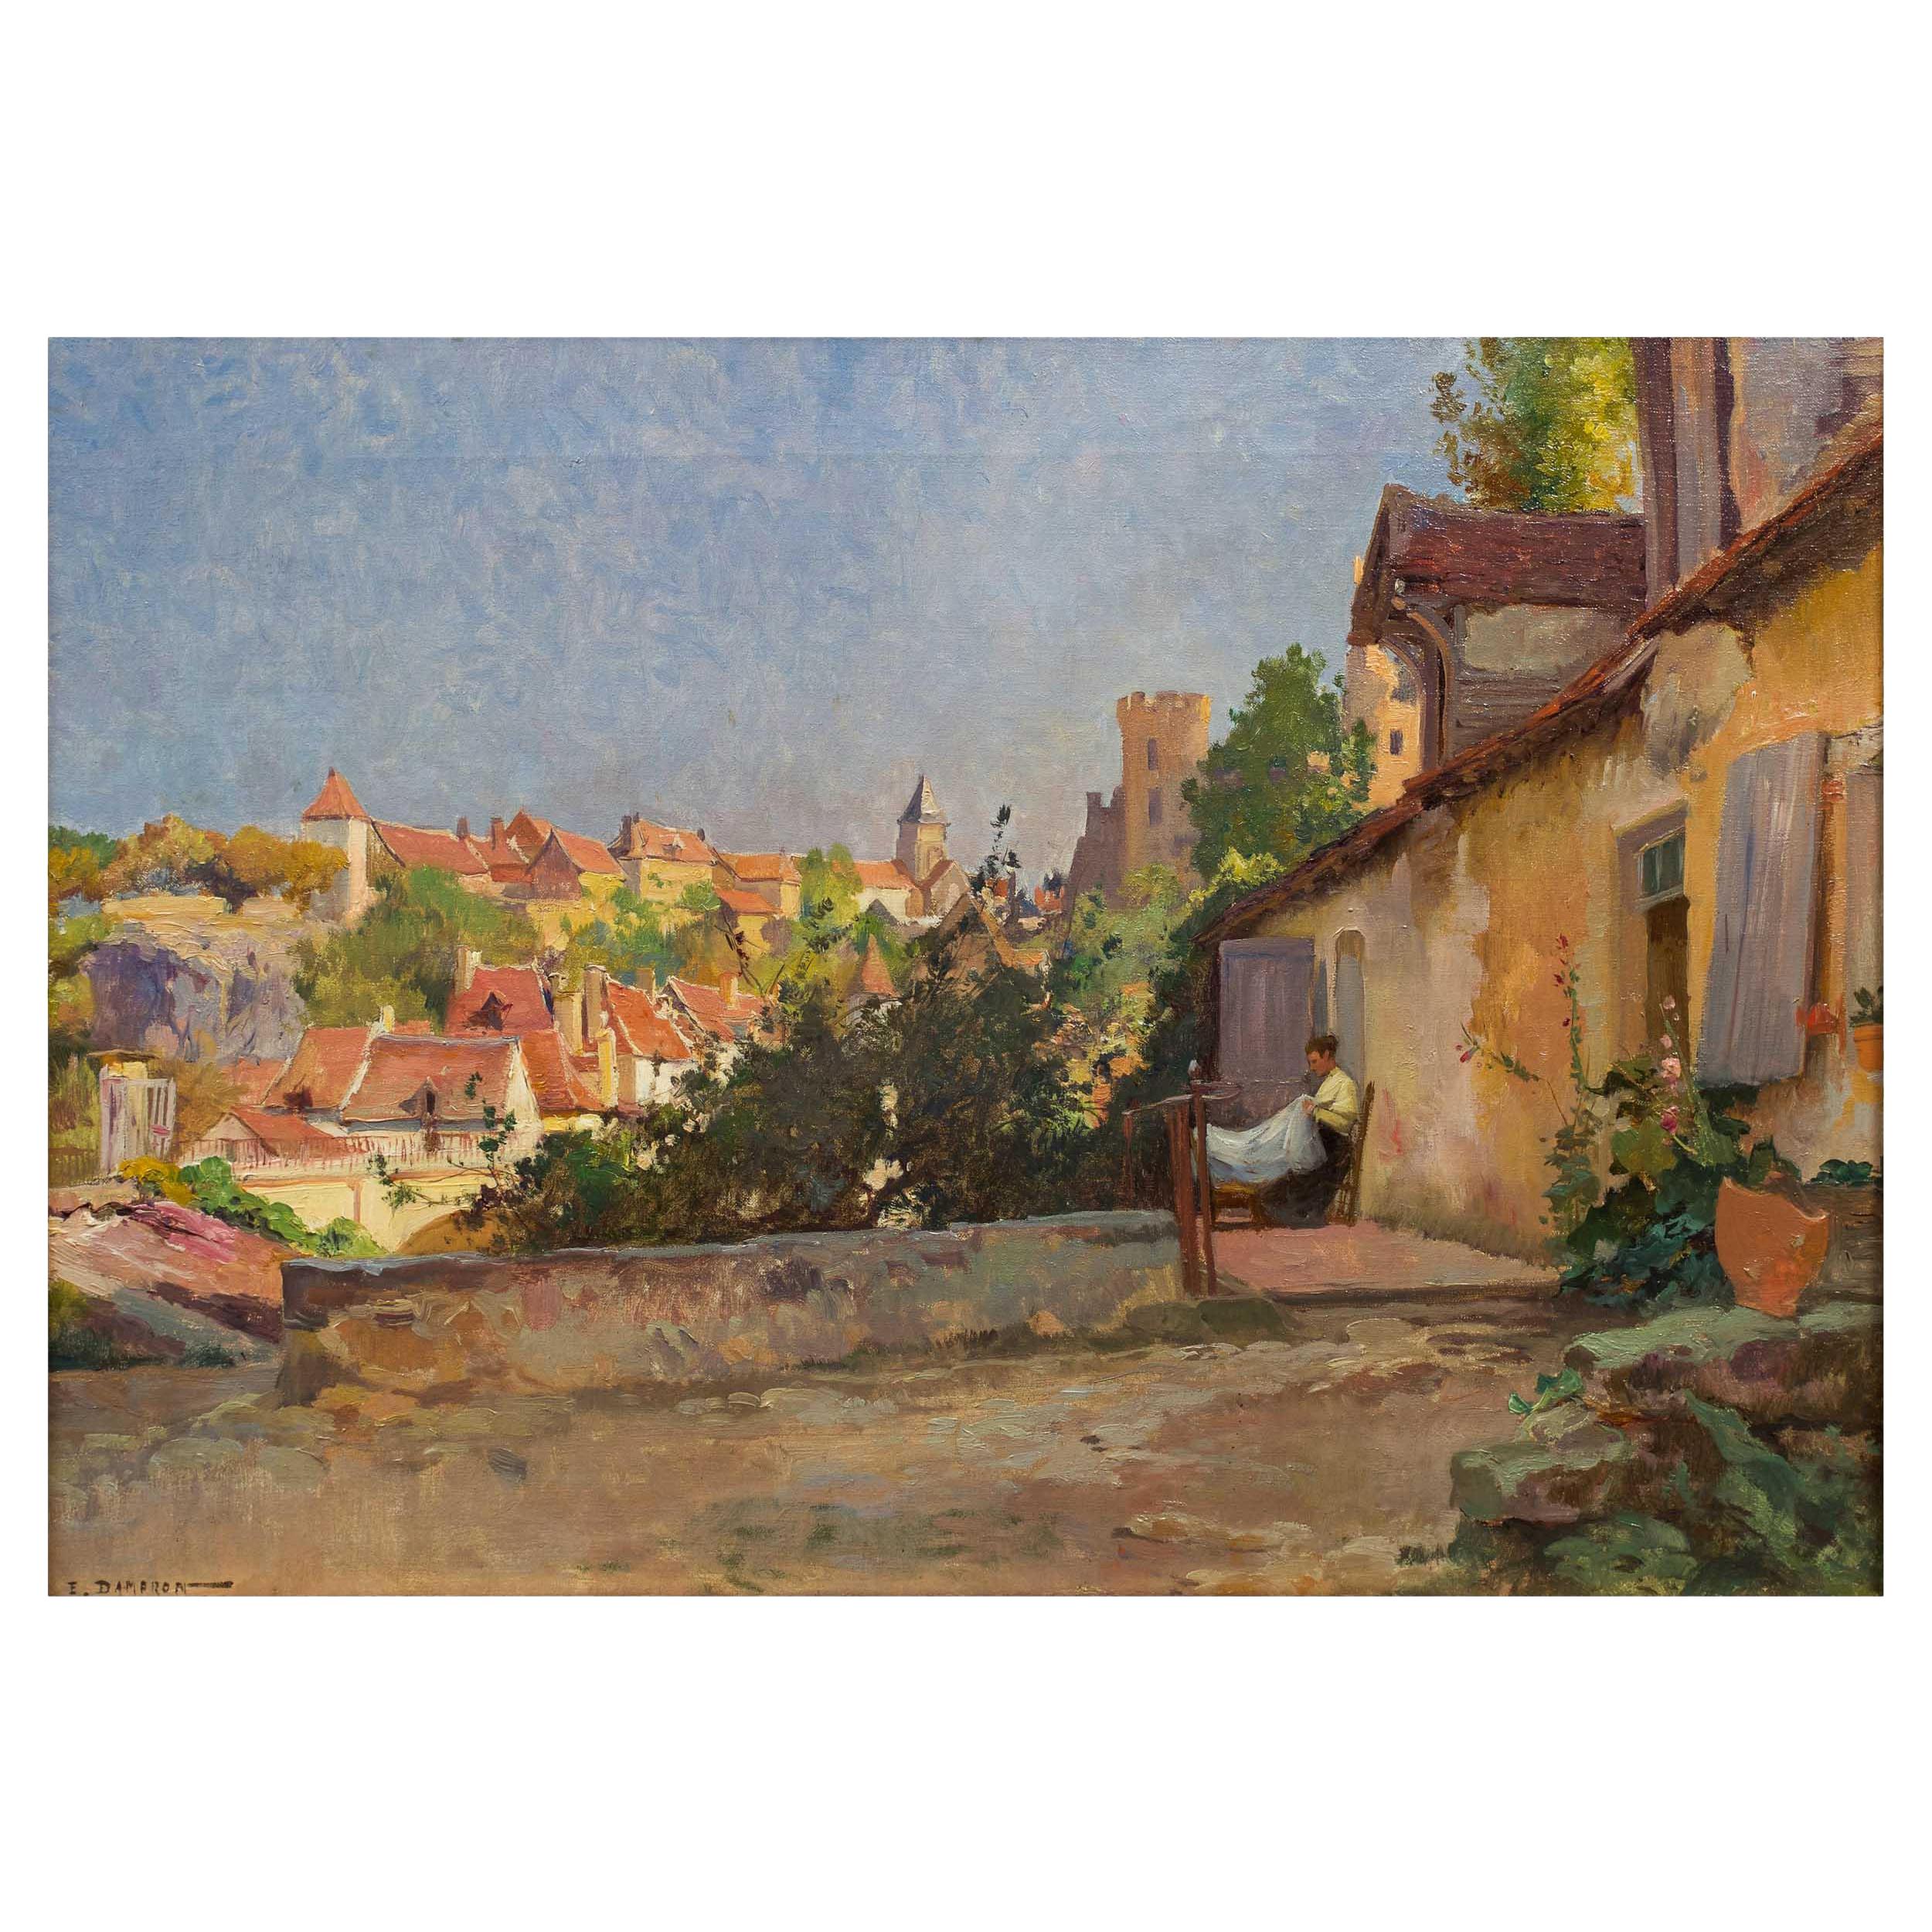 Barbizon Oil Painting "Village Ensoleille" by Emile-Charles Dameron 'French, 184